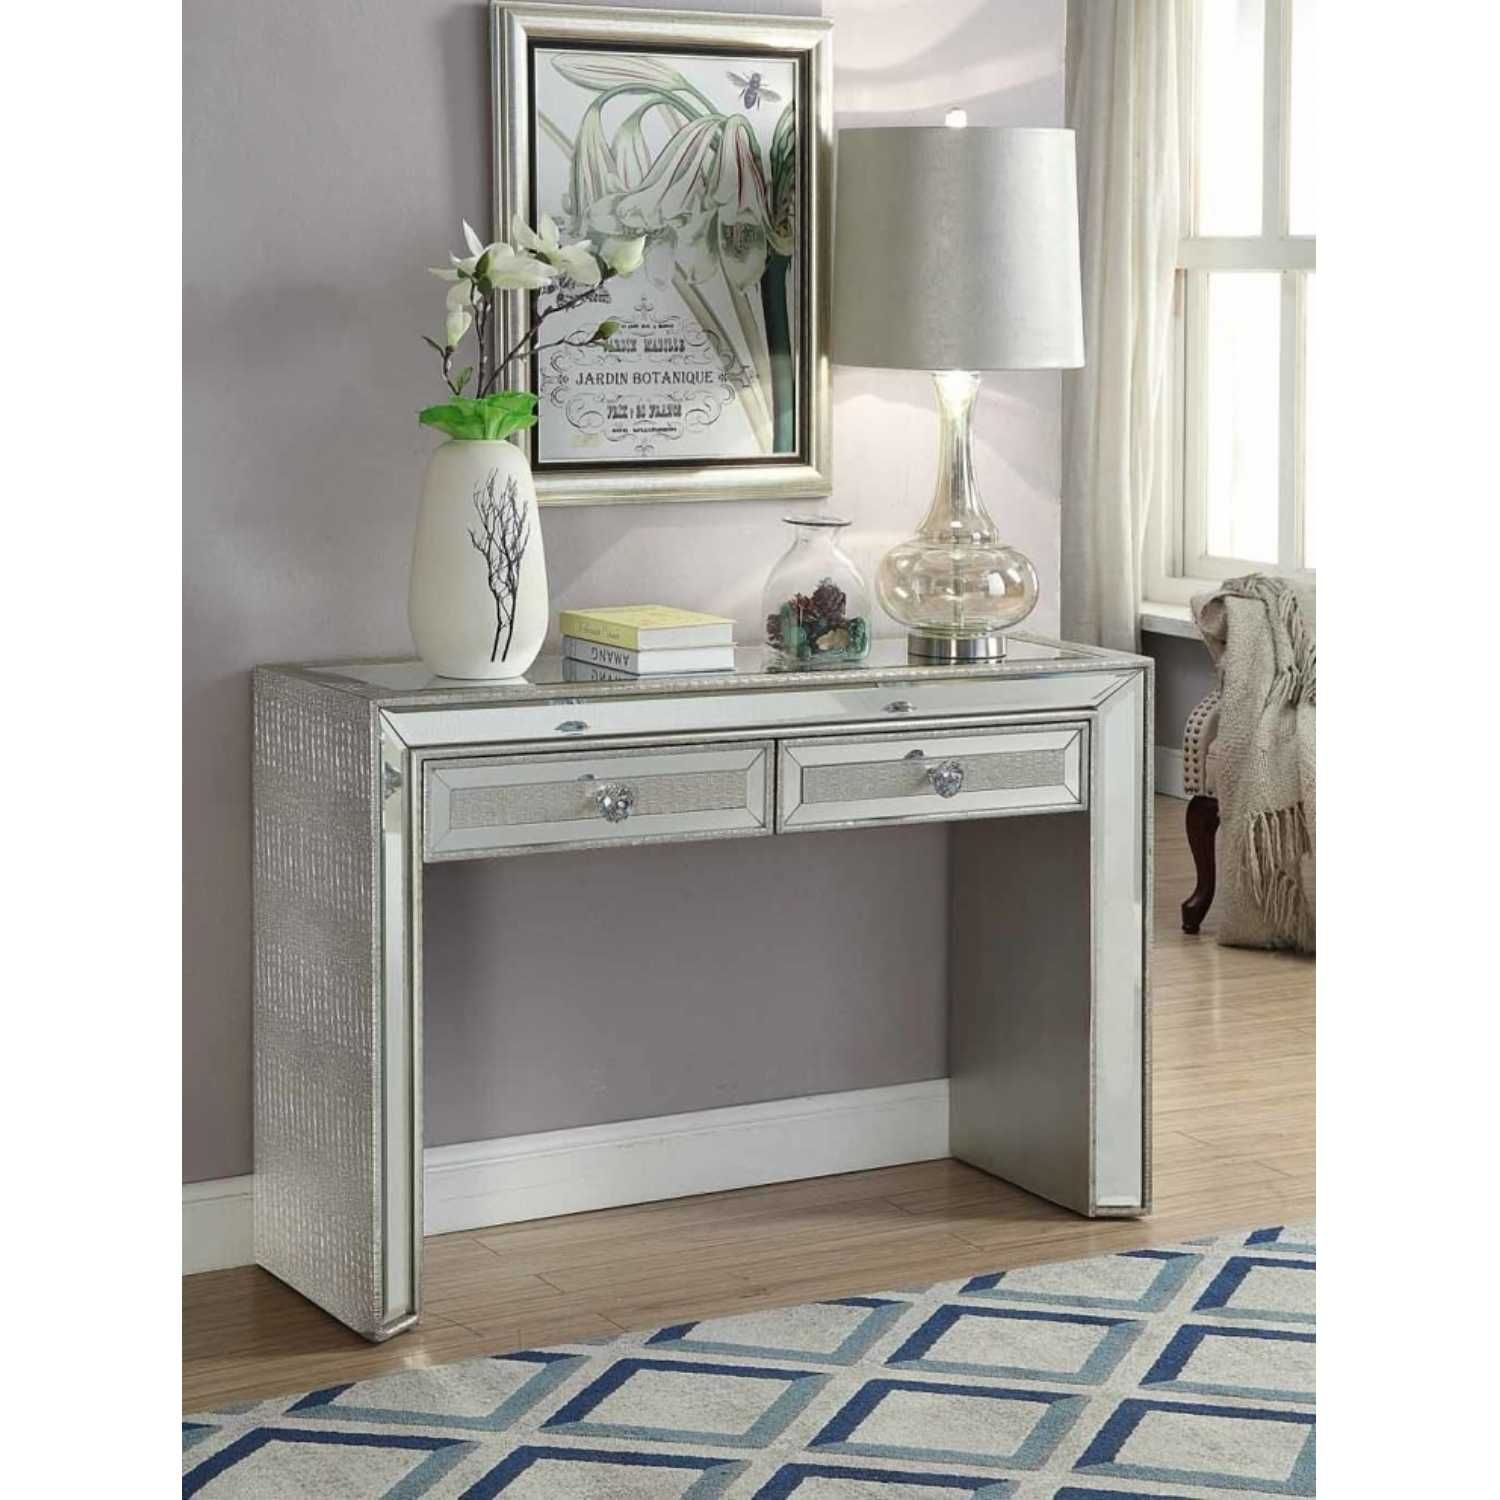 Sofia Modern Mirrored Glass Console Table With 2 Drawers Intended For Modern Console Tables (View 7 of 20)